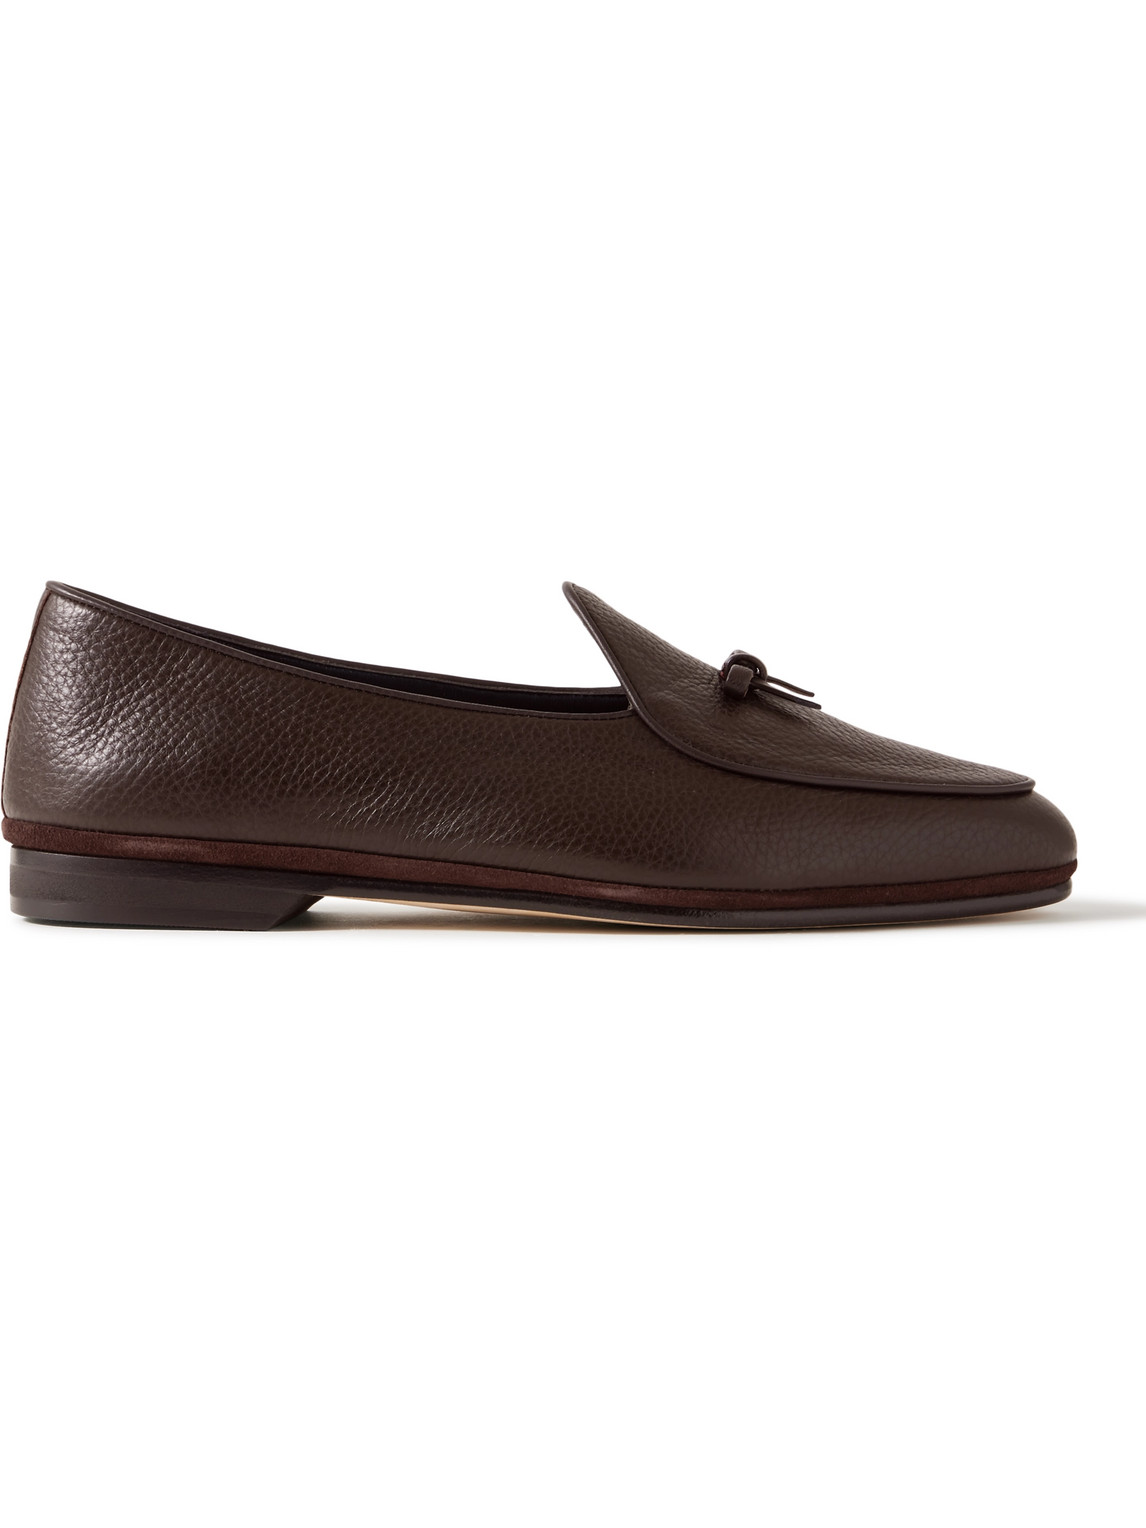 Marphy Suede-Trimmed Full-Grain Leather Tasselled Loafers